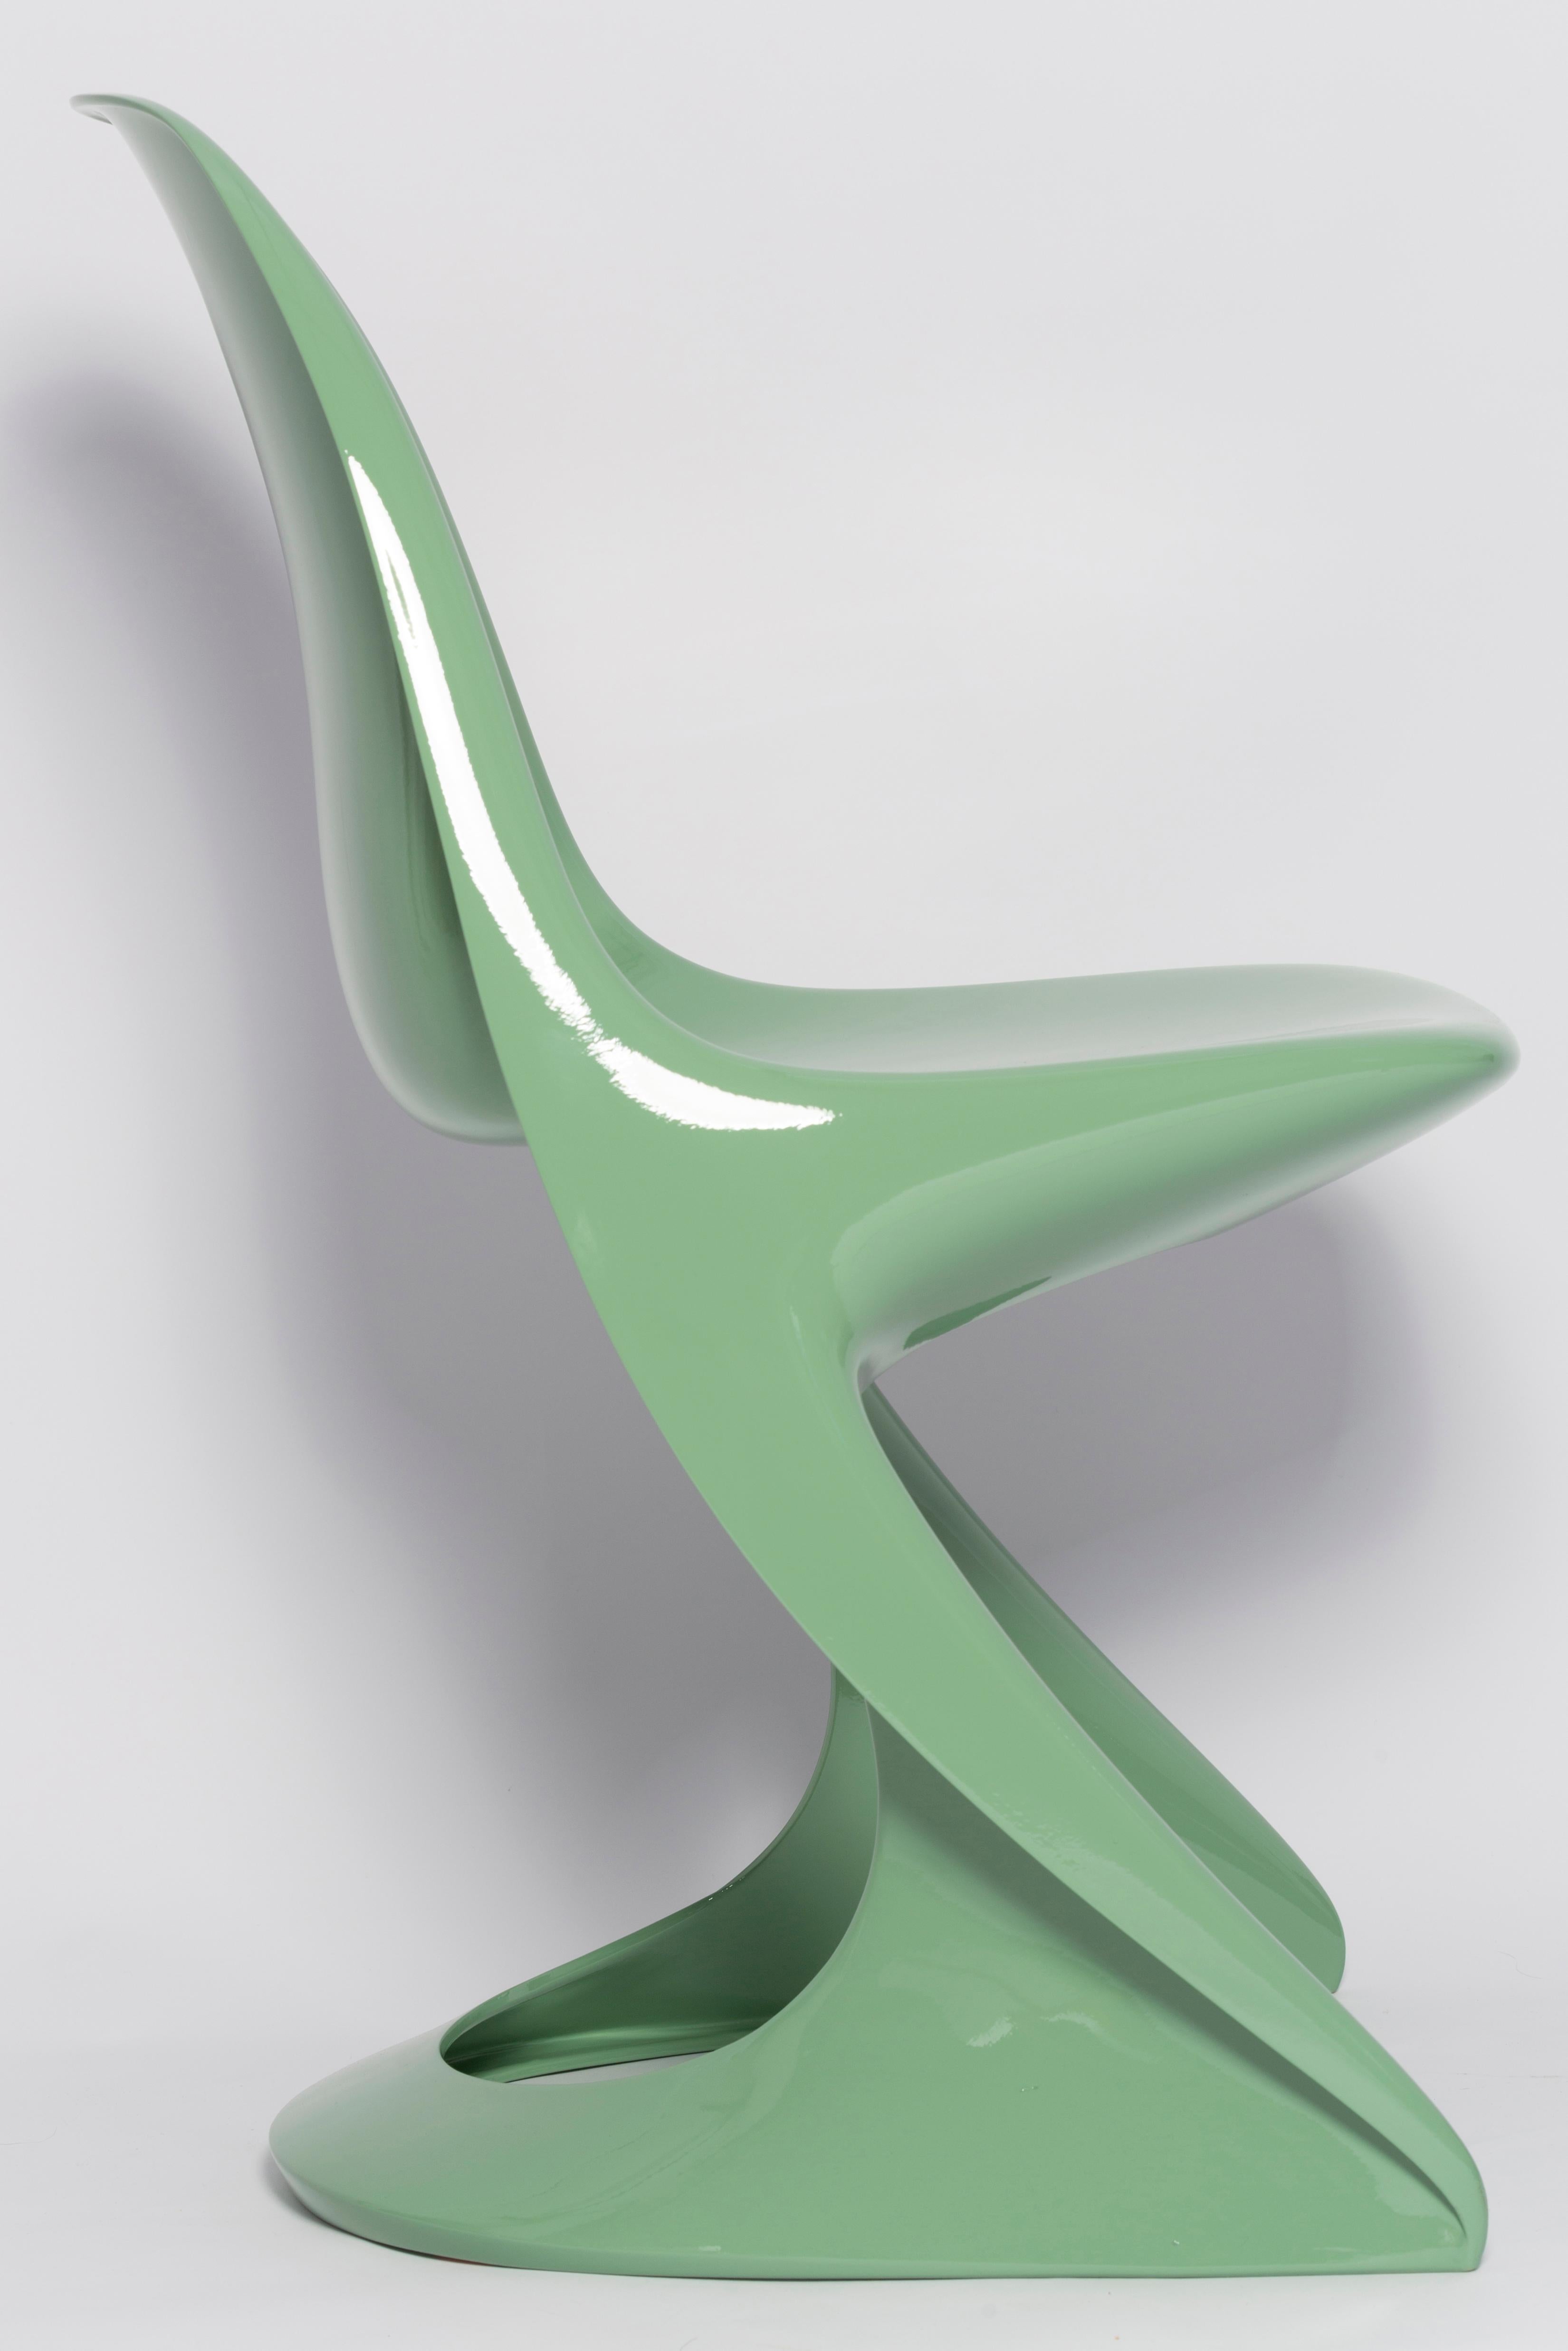 Lacquer Four Mid-Century Casalino Chairs in Jade Green, Alexander Begge, Casala, 1970s For Sale